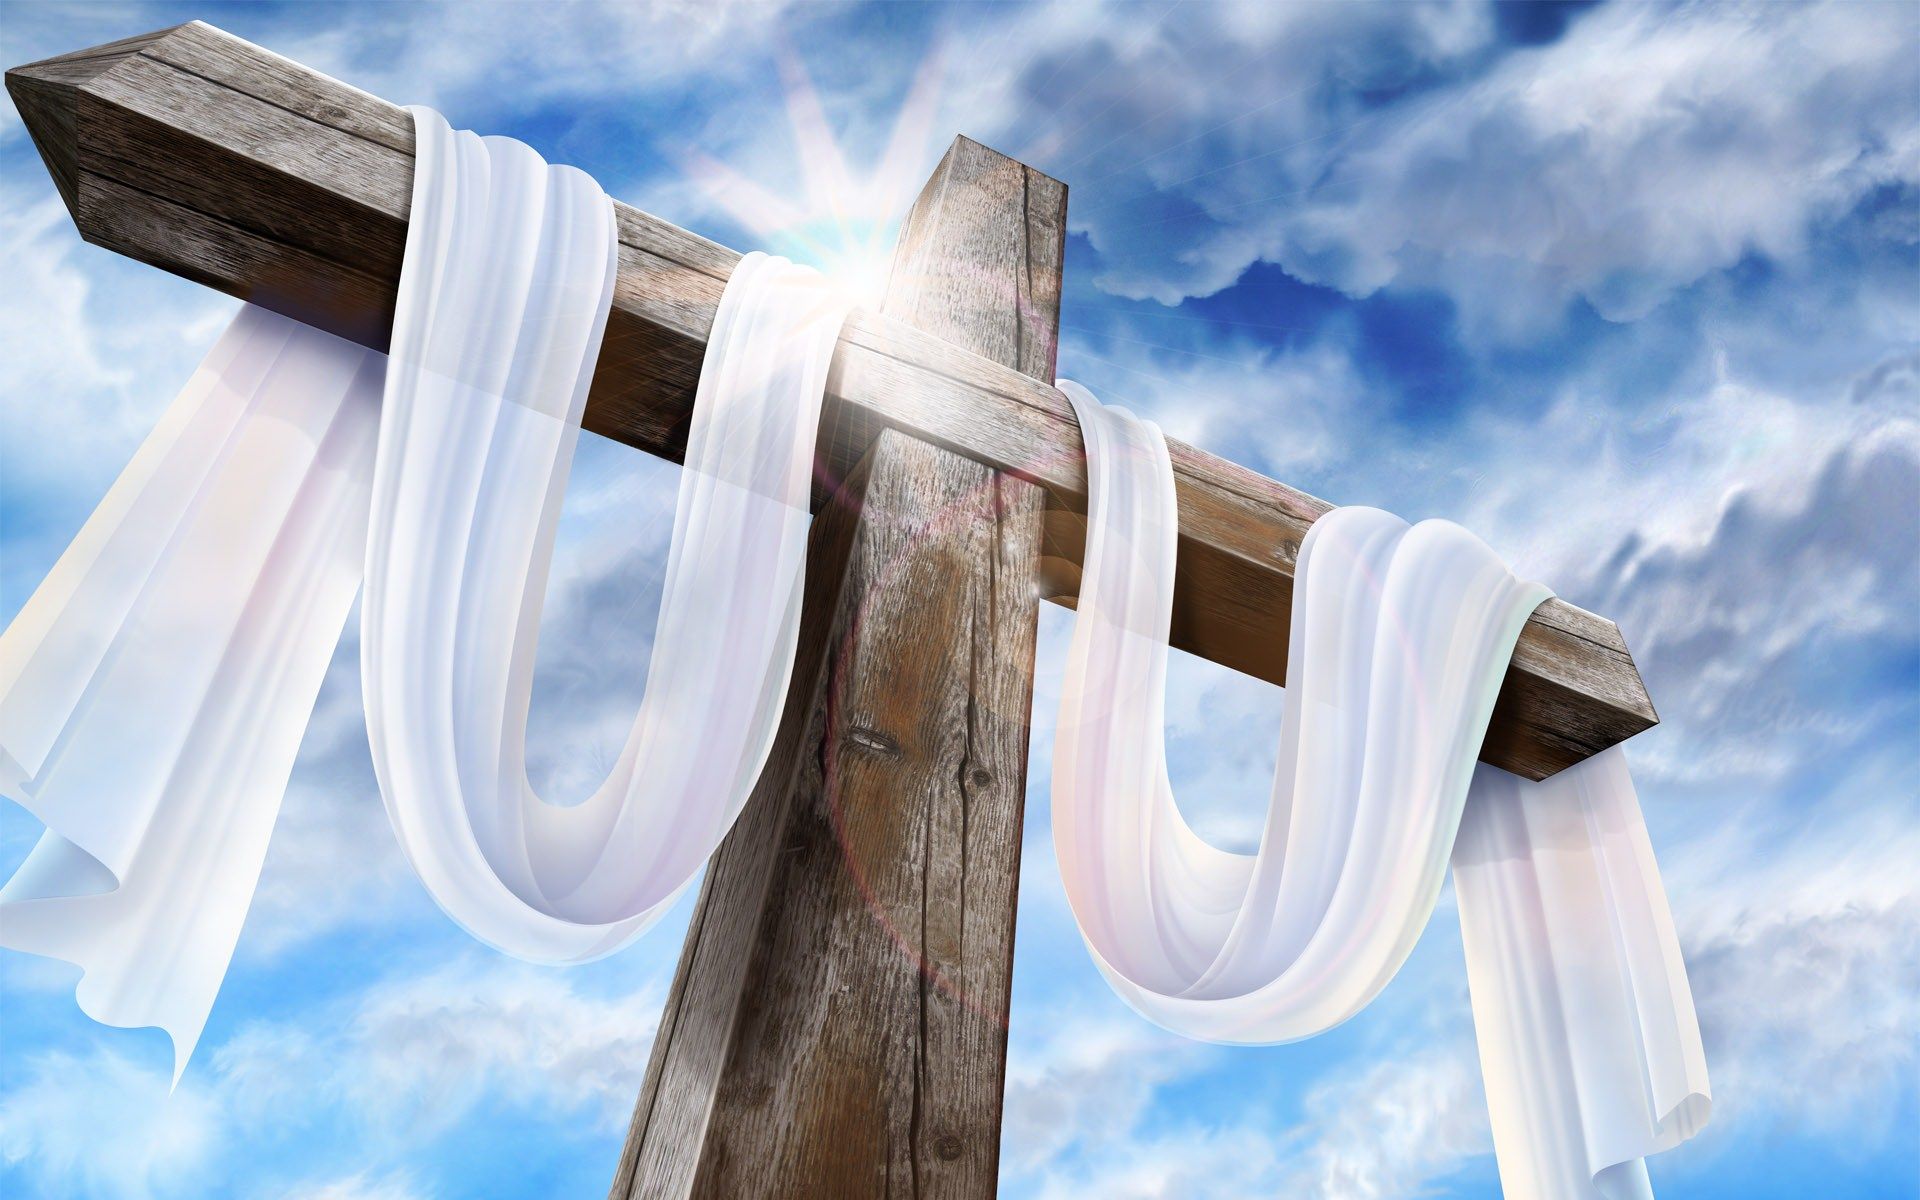 Free download Resurrection Easter Wallpaper Image amp Picture